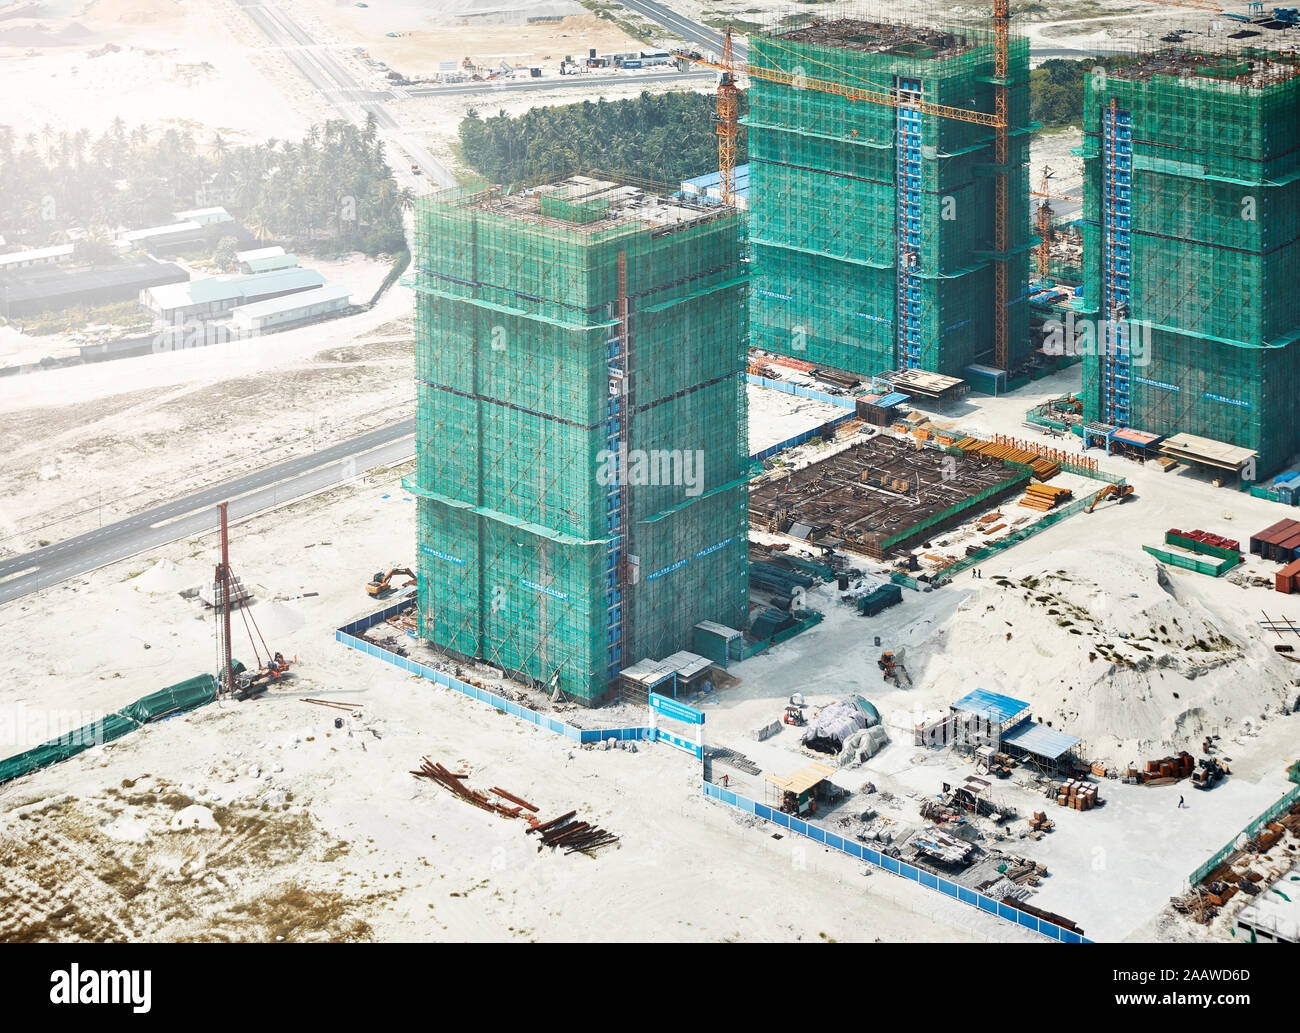 View of construction site during winter at Malè, Maldives seen through airplane window Stock Photo